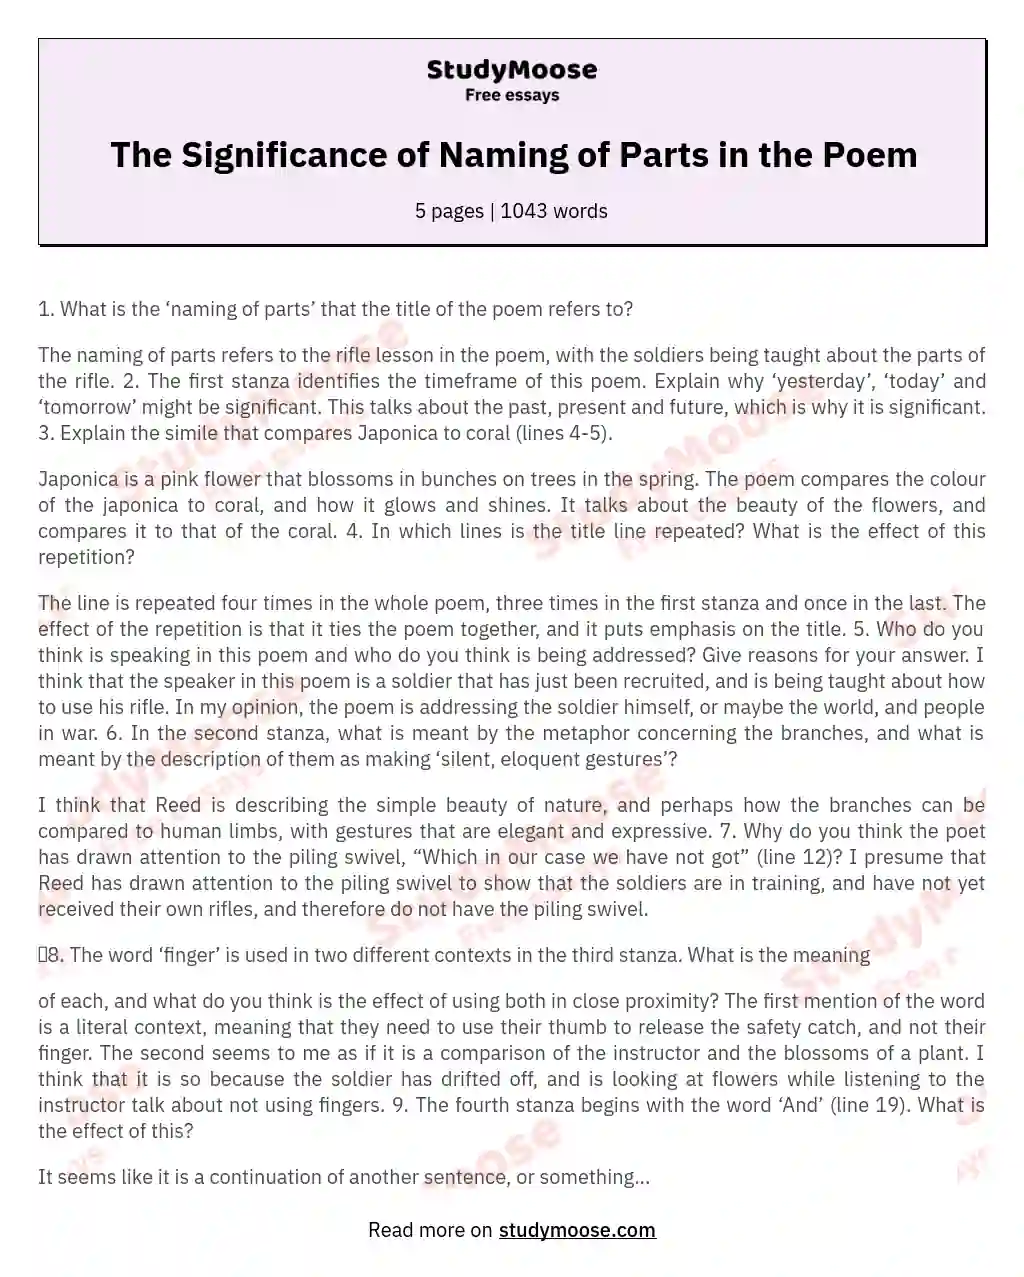 The Significance of Naming of Parts in the Poem